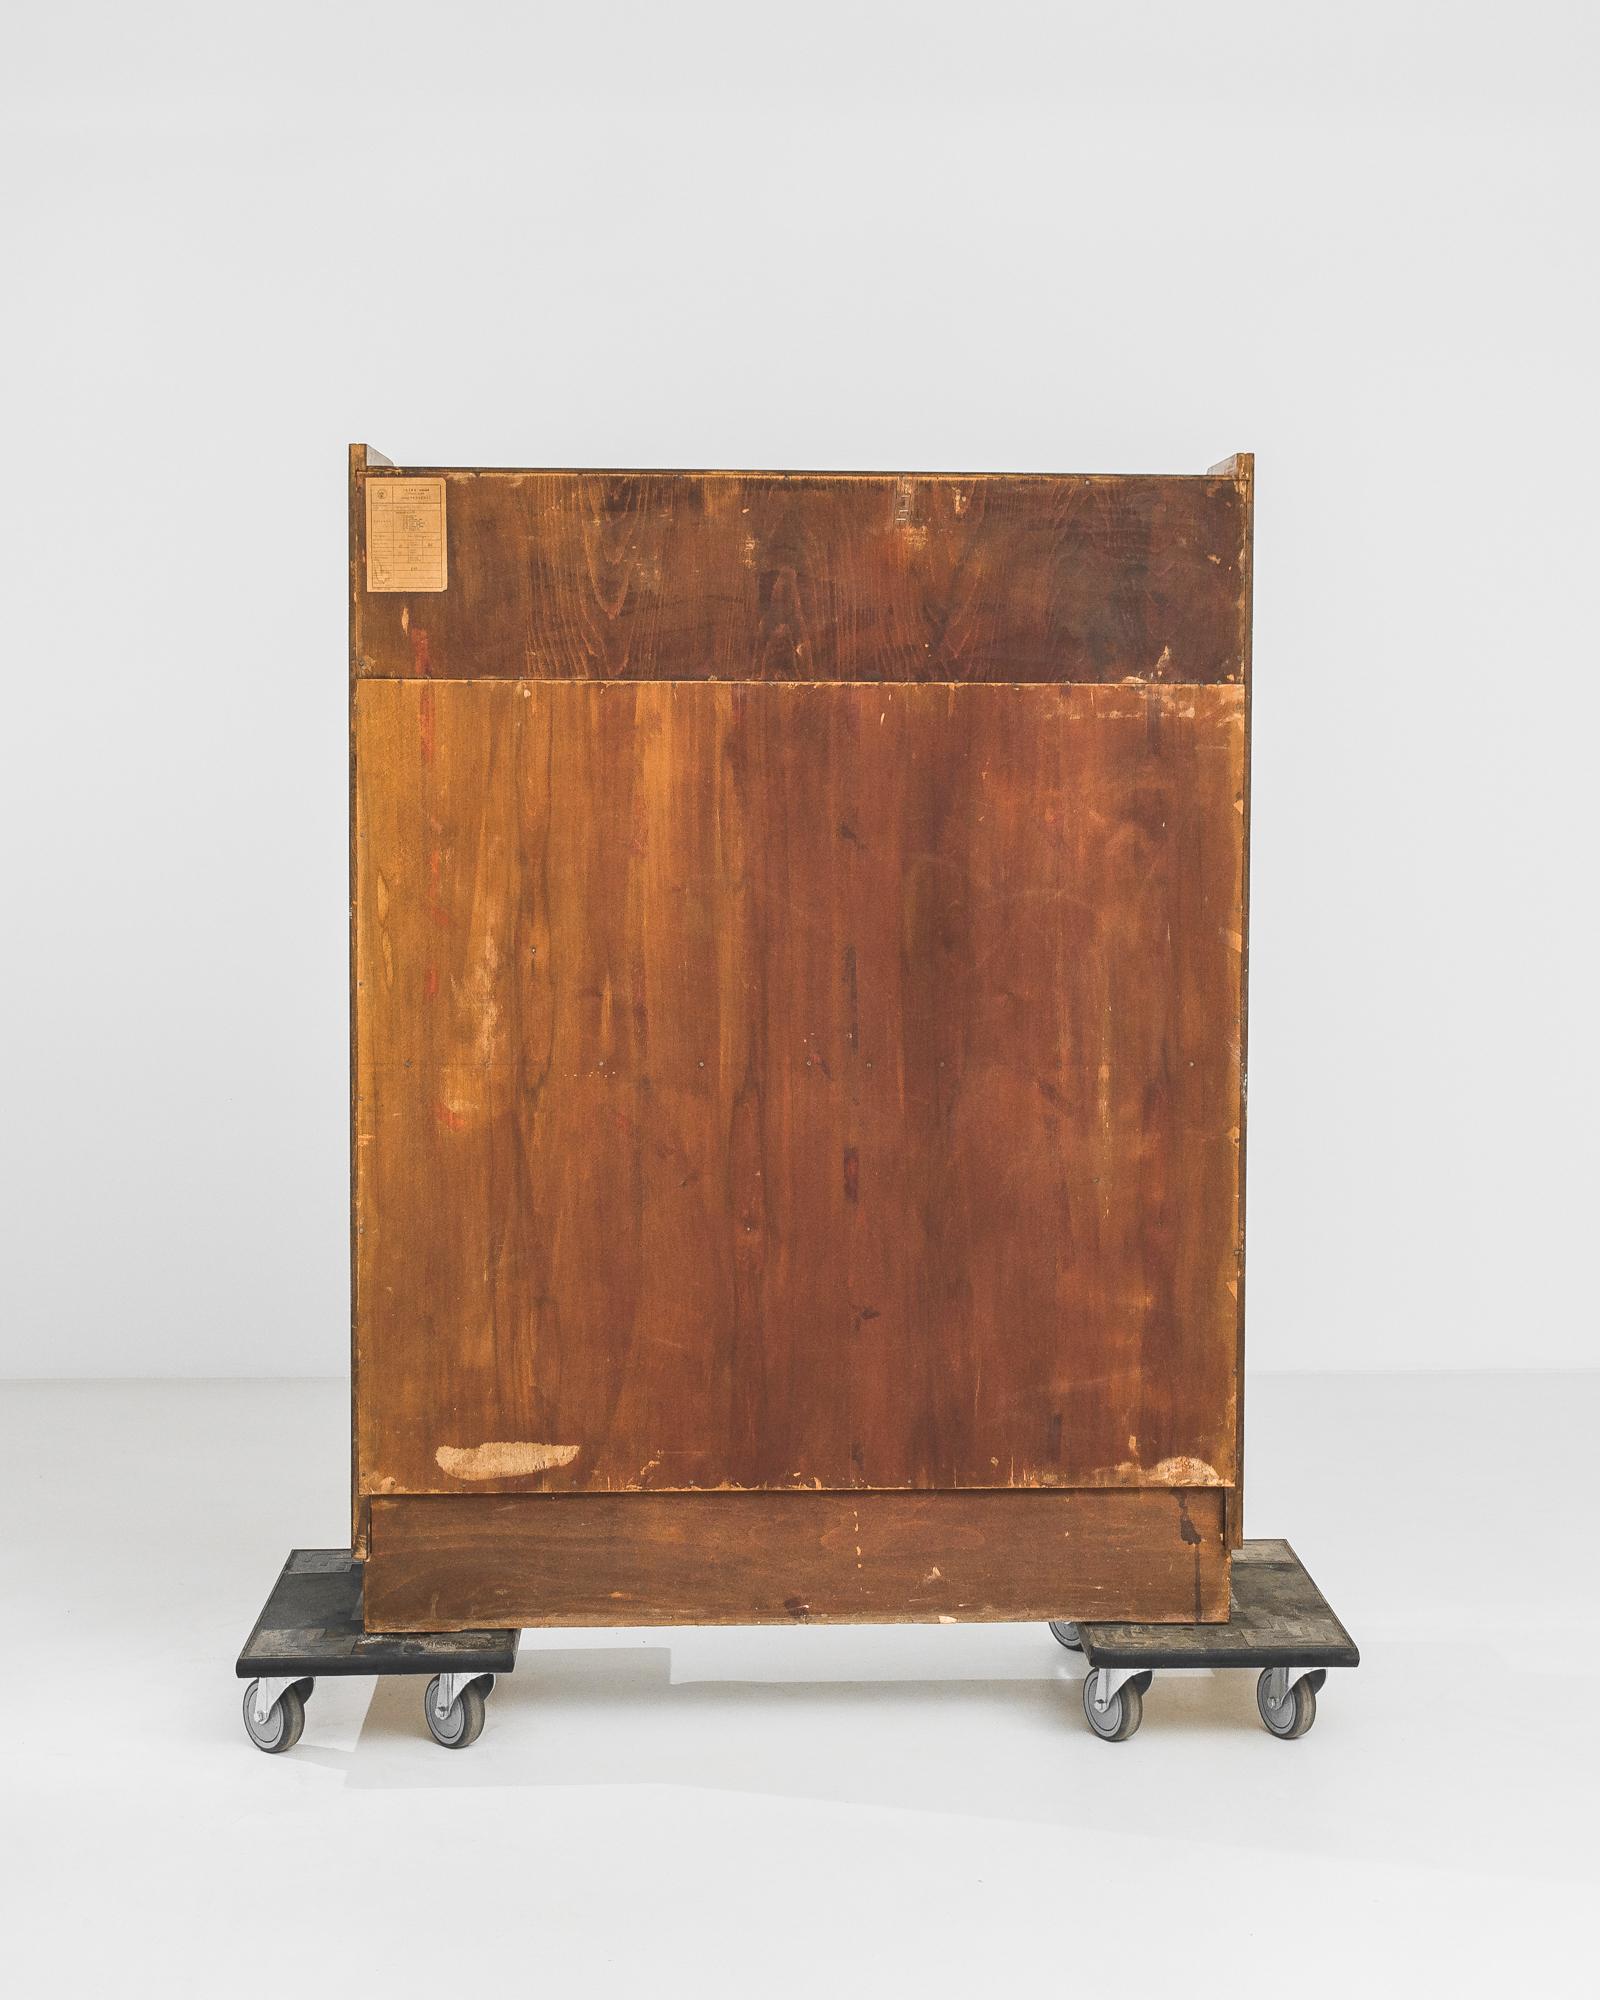 A wooden vitrine manufactured by Tatra Nabytok Pravenec in Czechia circa 1960. A sophisticated six shelf vitrine from one of the premier furniture manufacturers of the mid 20th Century. The angled front feet are mirrored by the slightly angled